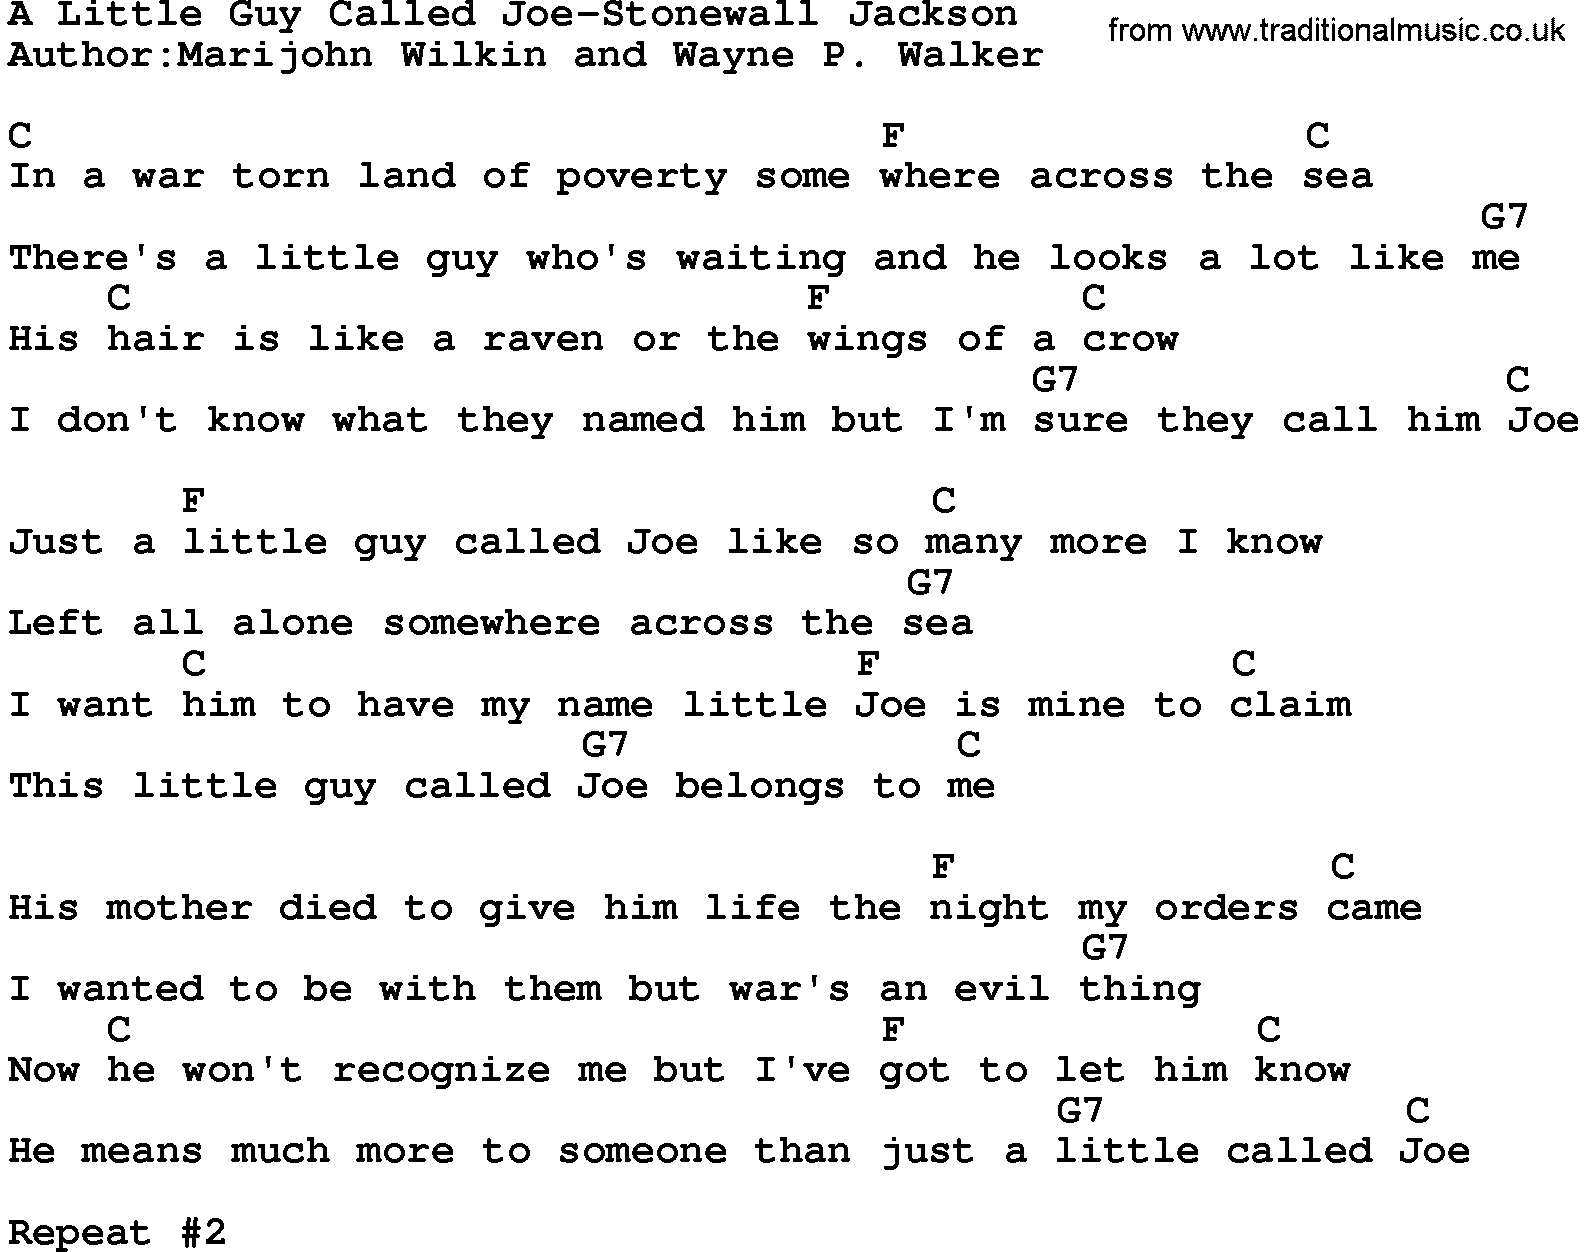 Country music song: A Little Guy Called Joe-Stonewall Jackson lyrics and chords